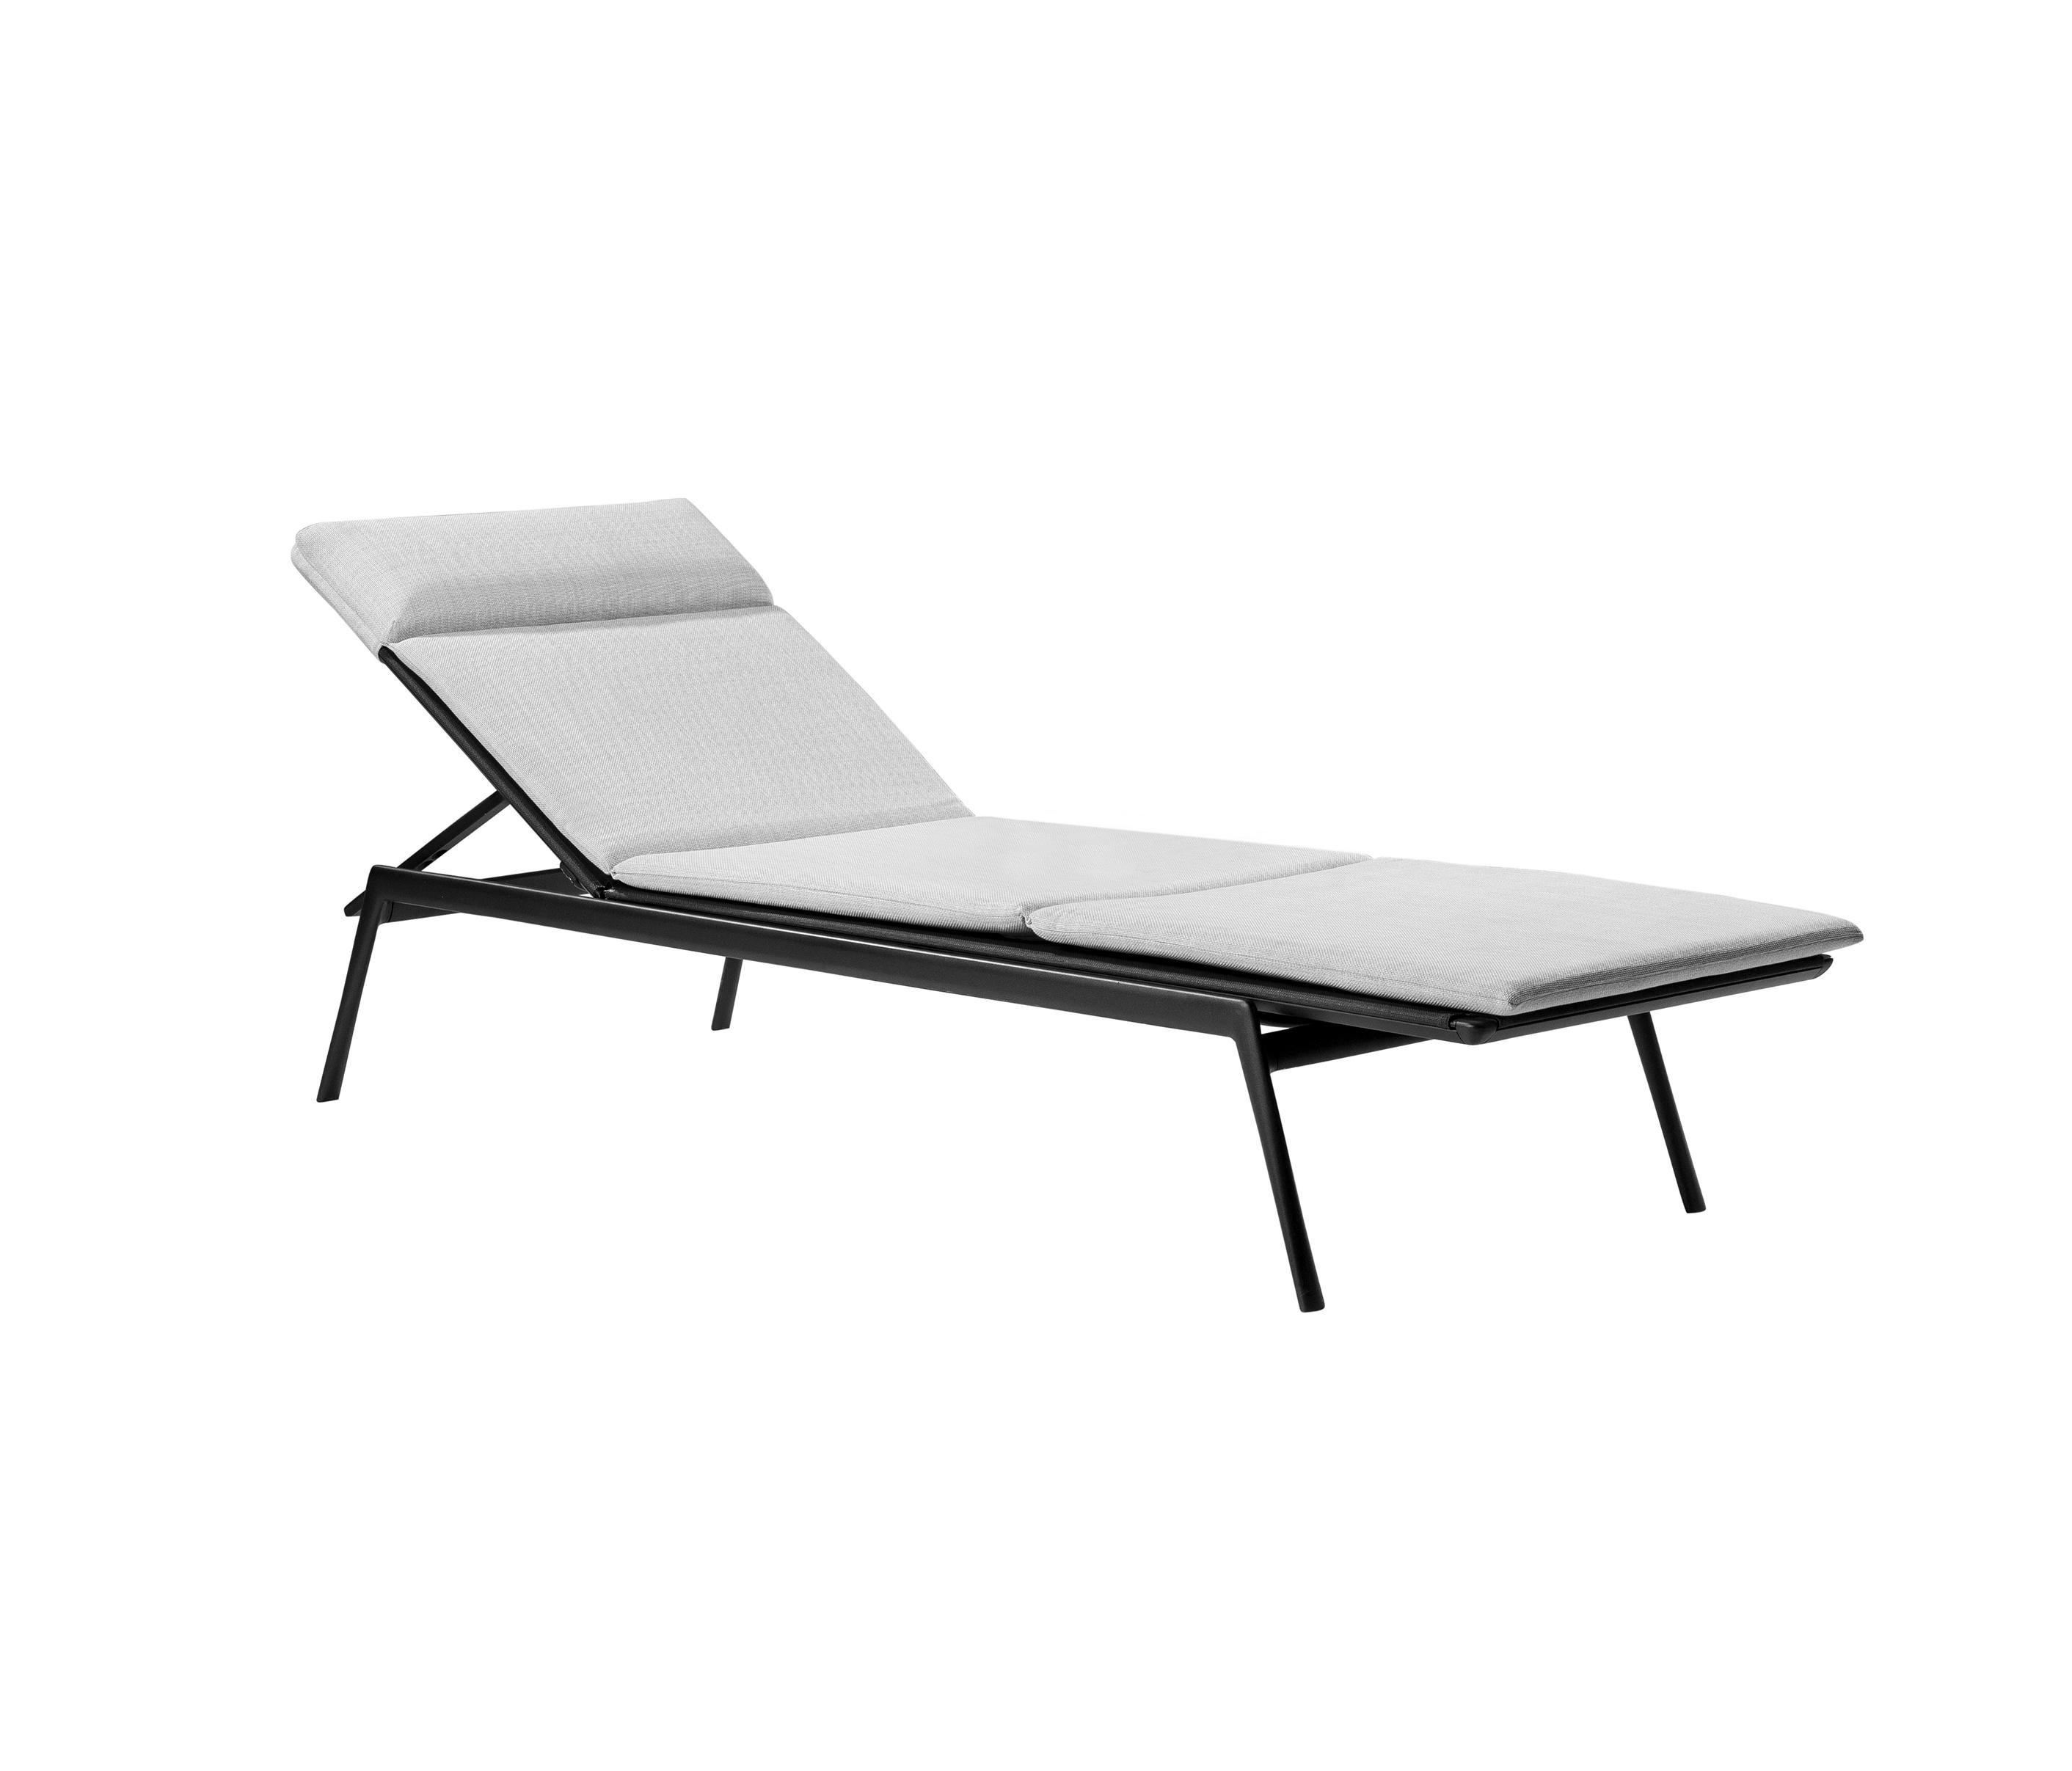 BRANCH LOUNGER - Sun loungers from Tribù | Architonic